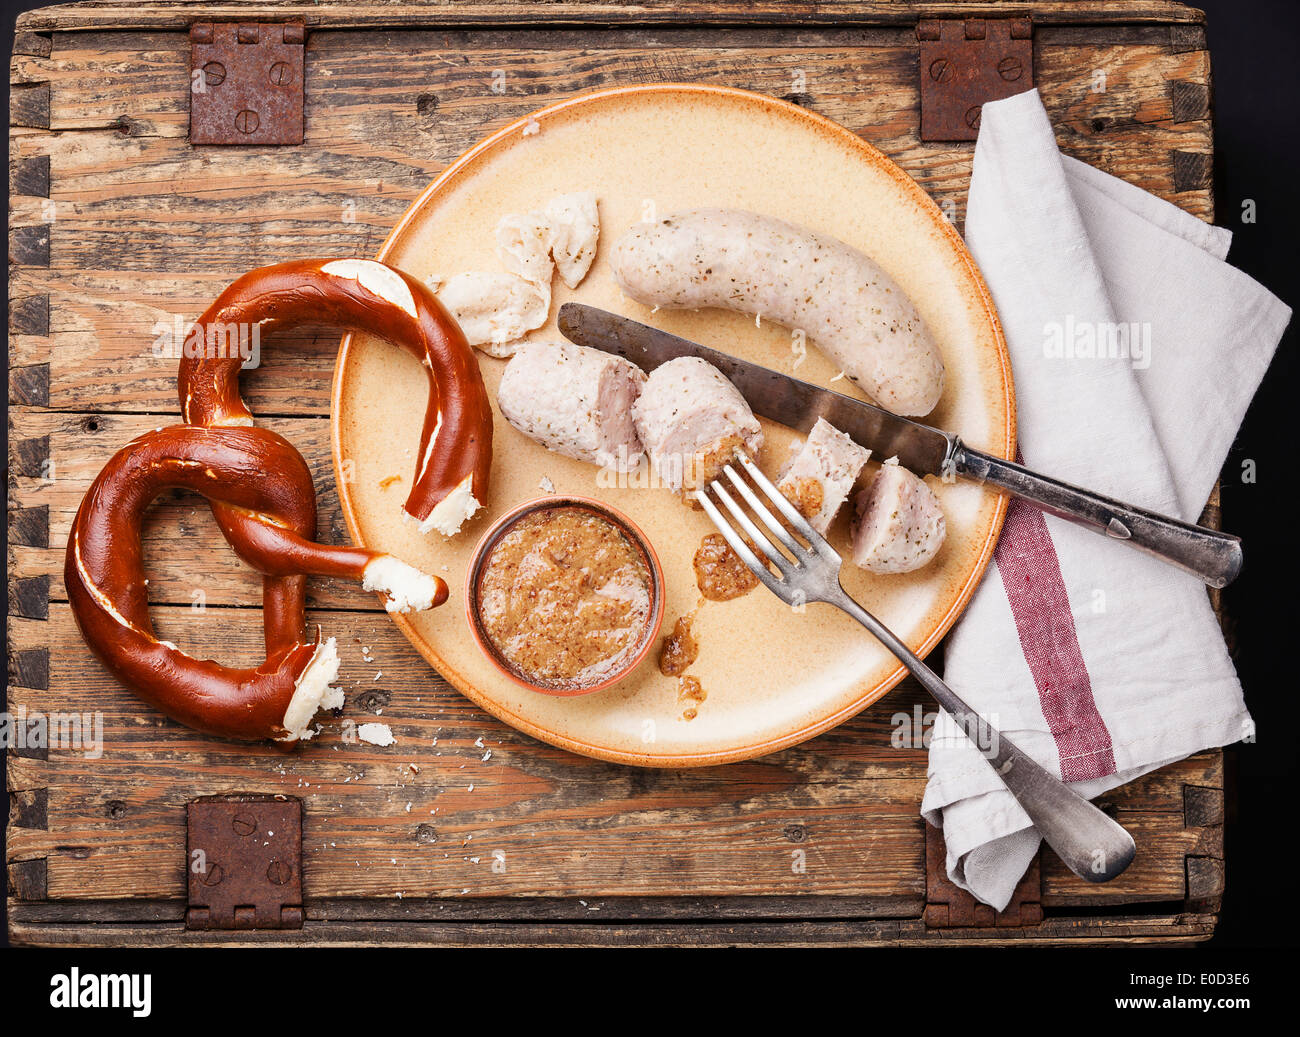 Bavarian snack with weisswurst white sausages and pretzel Stock Photo